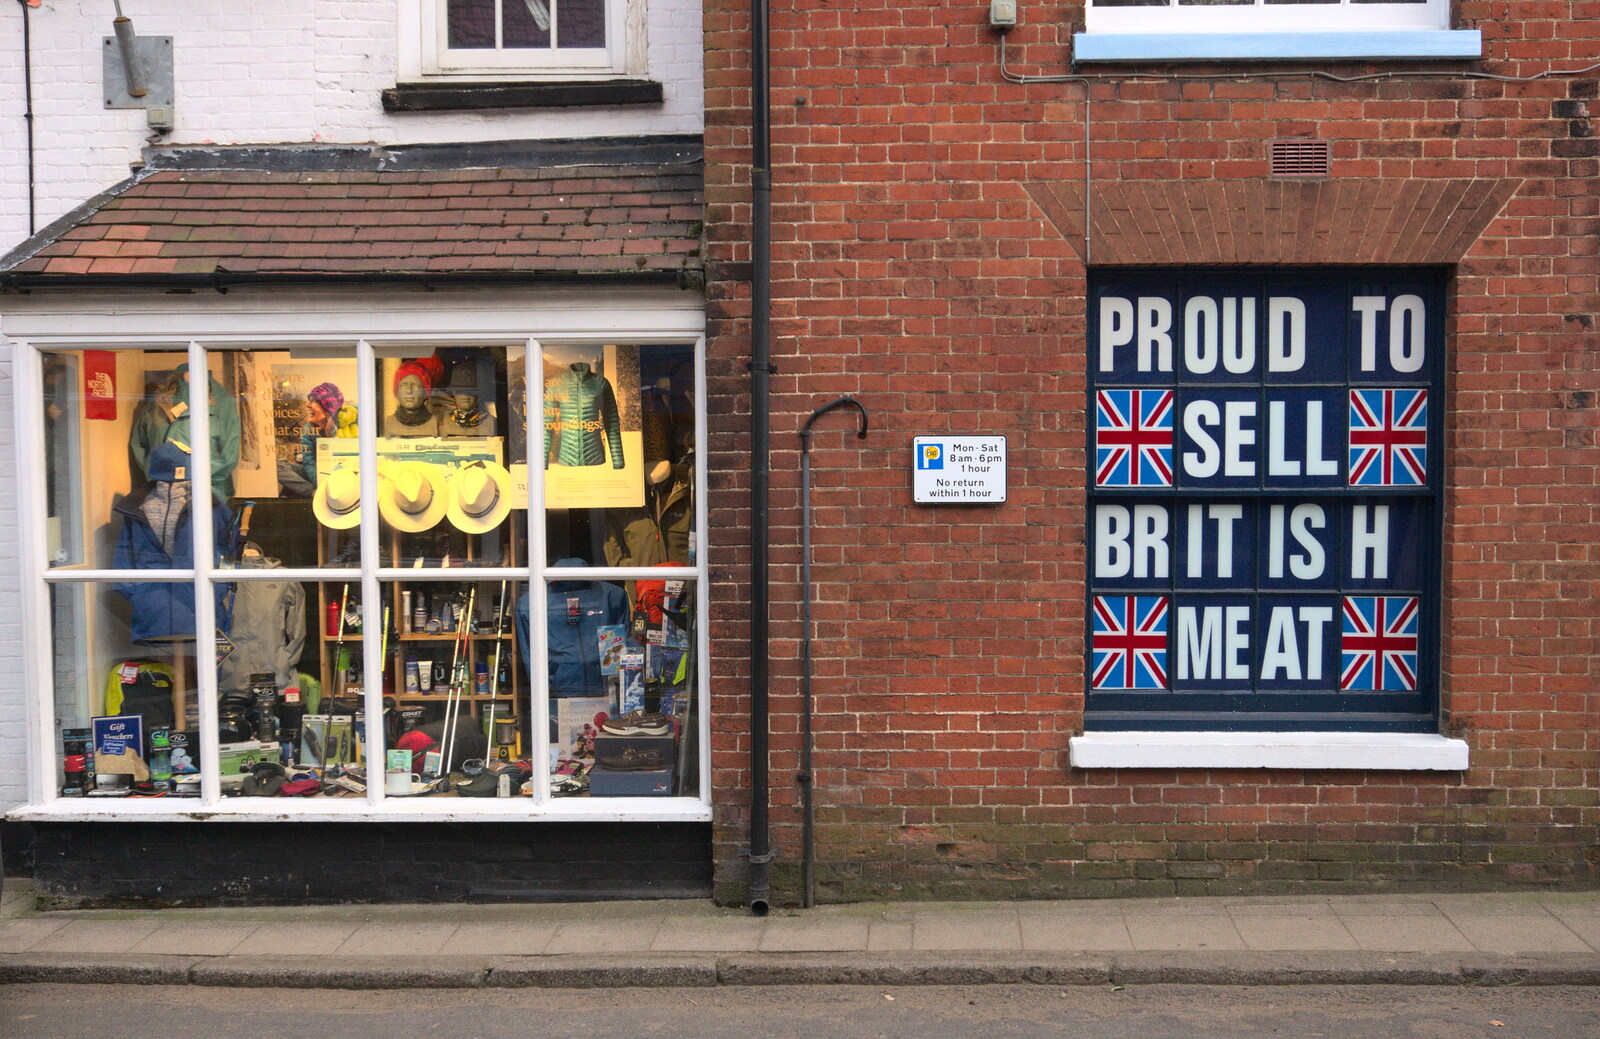 'Proud to sell Br, it is 'h' meat'. Or something from The BSCC Weekend Away, Holt, Norfolk - 12th May 2018